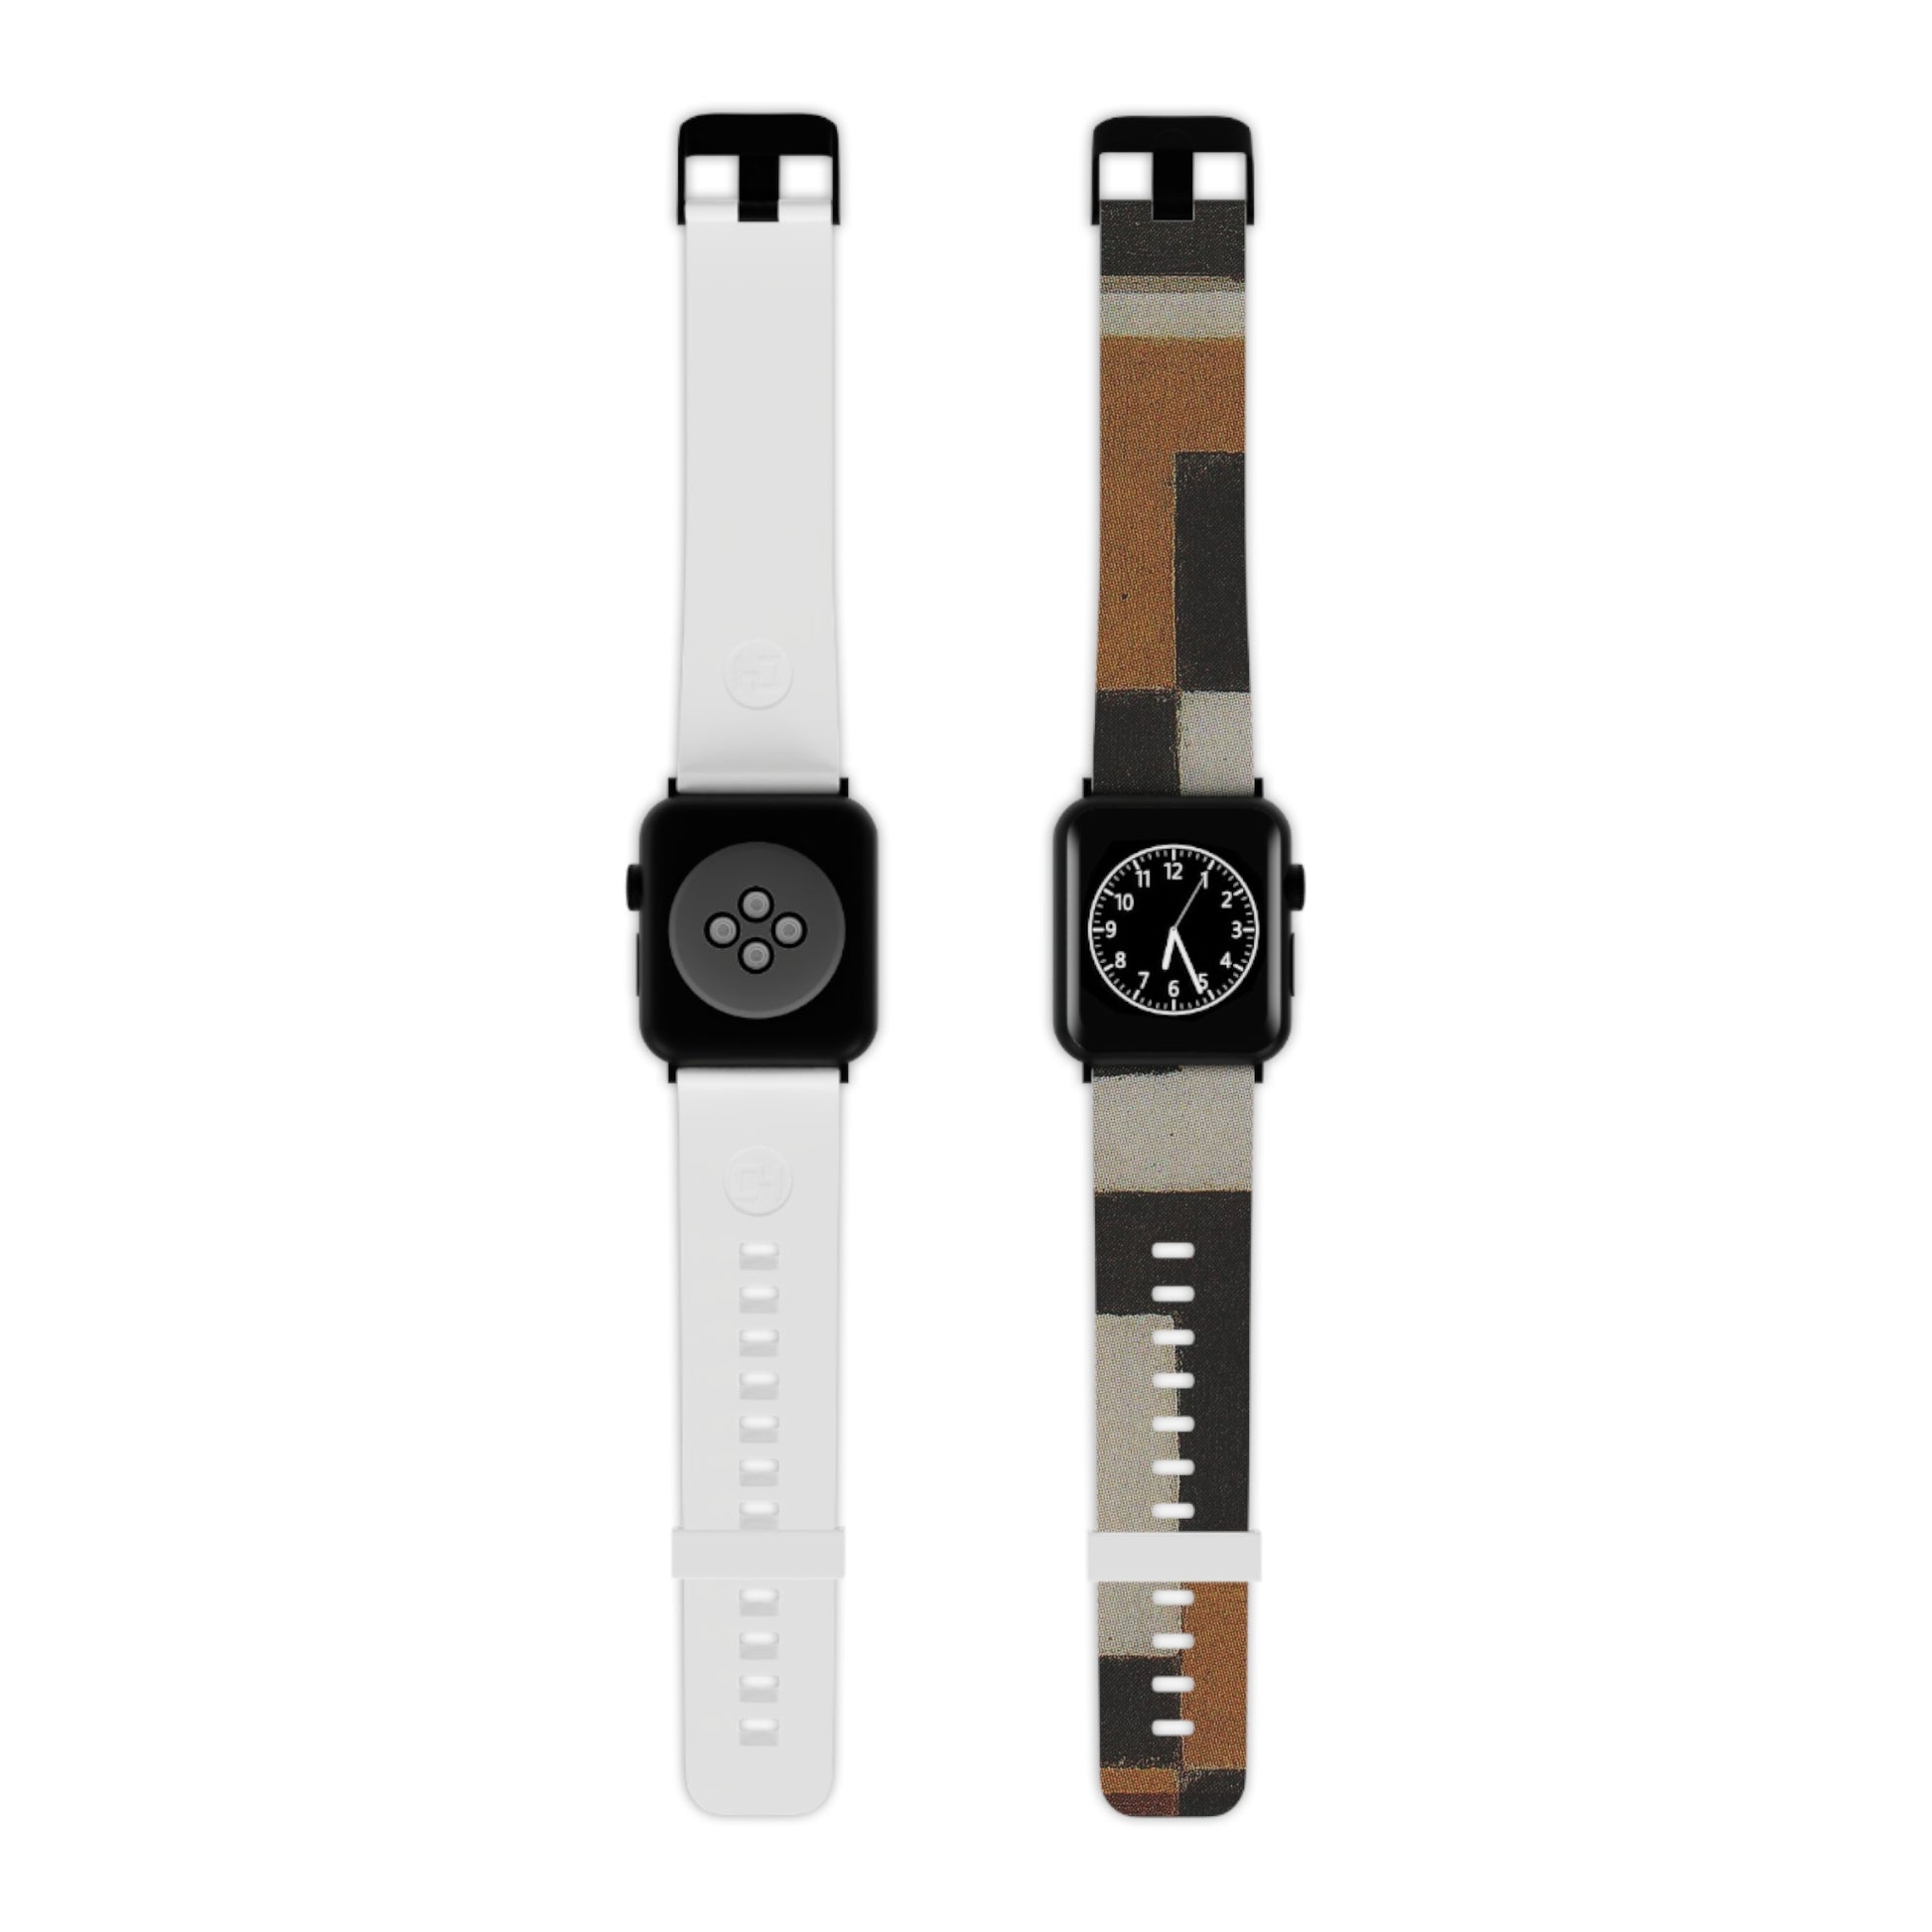 THEO VAN DOESBURG - COMPOSITION - ART WATCH BAND FOR APPLE WATCH